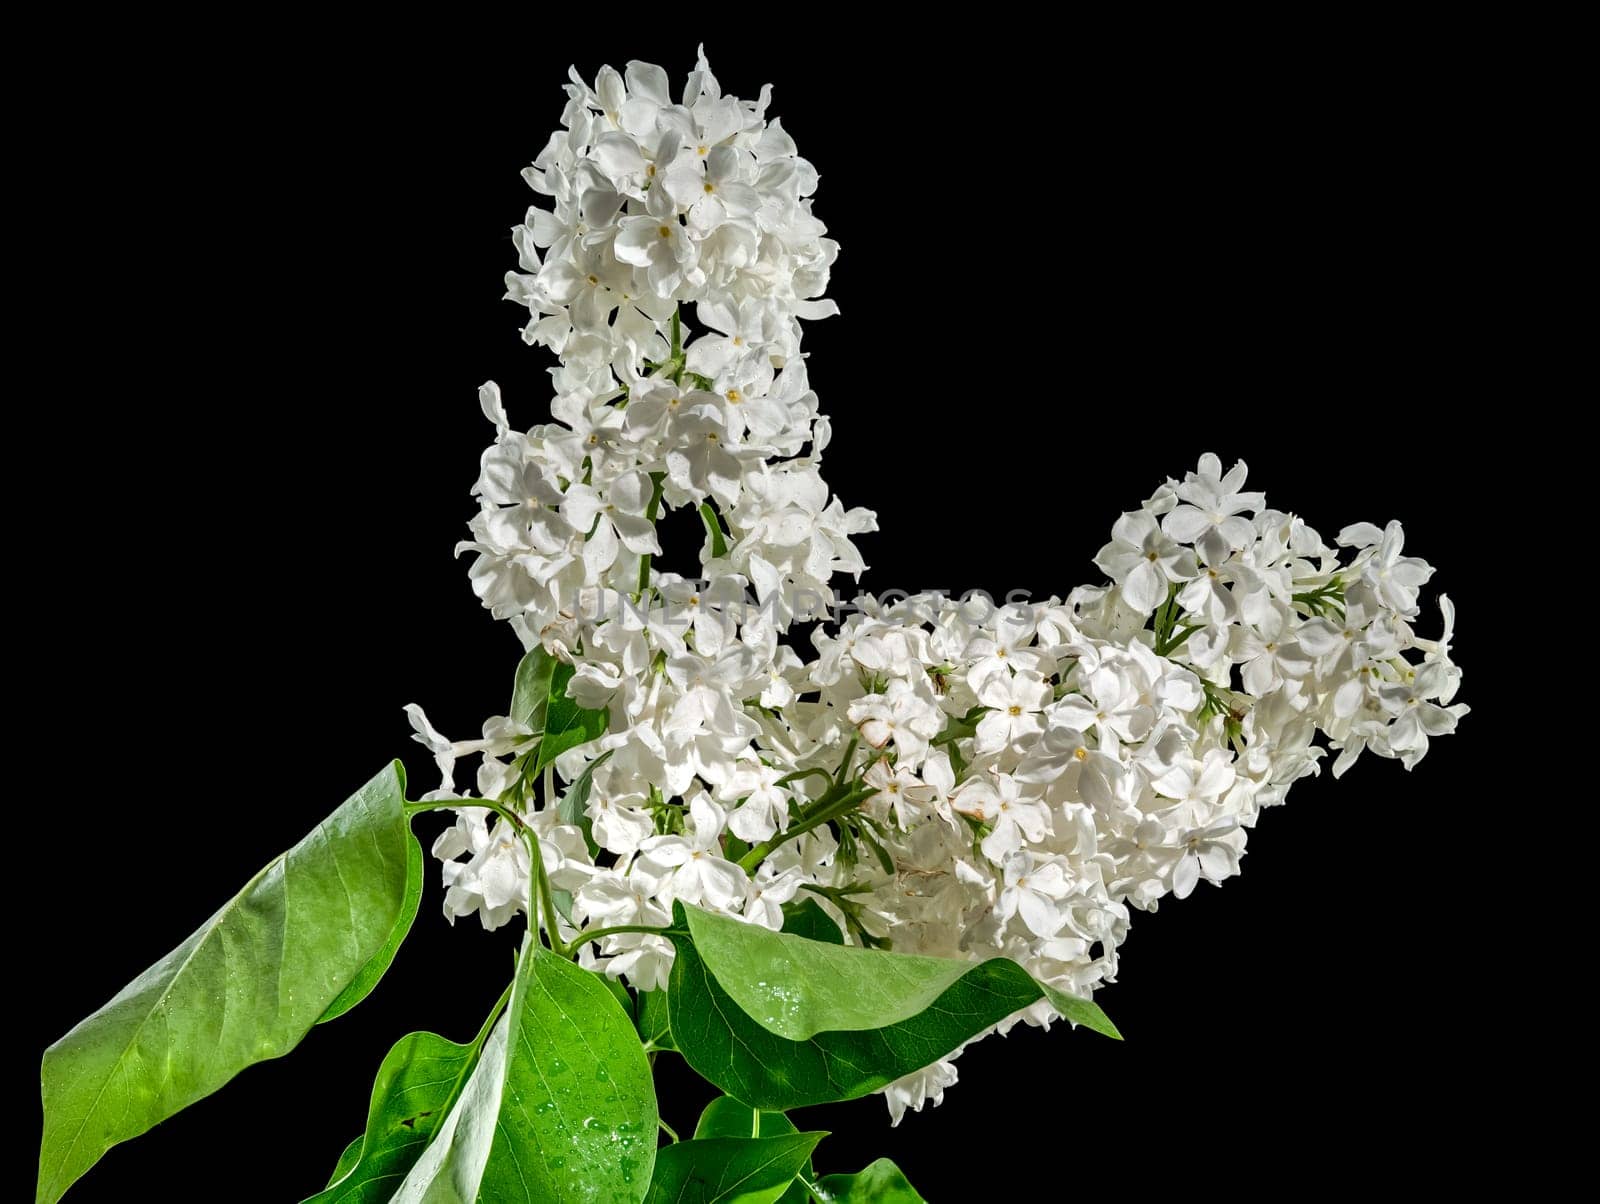 Blooming white lilac on a black background by Multipedia